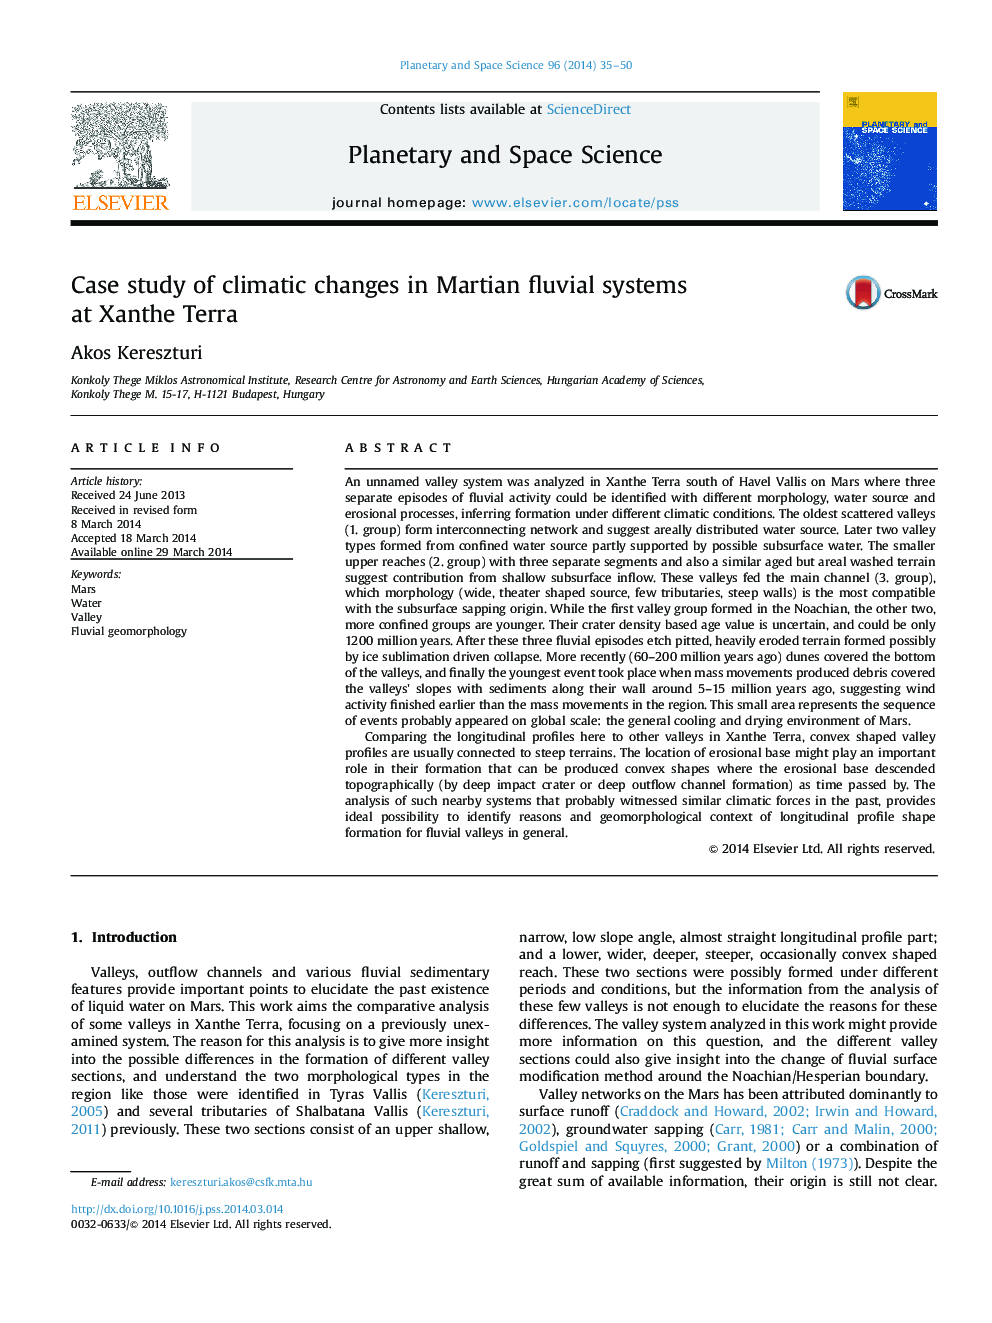 Case study of climatic changes in Martian fluvial systems at Xanthe Terra